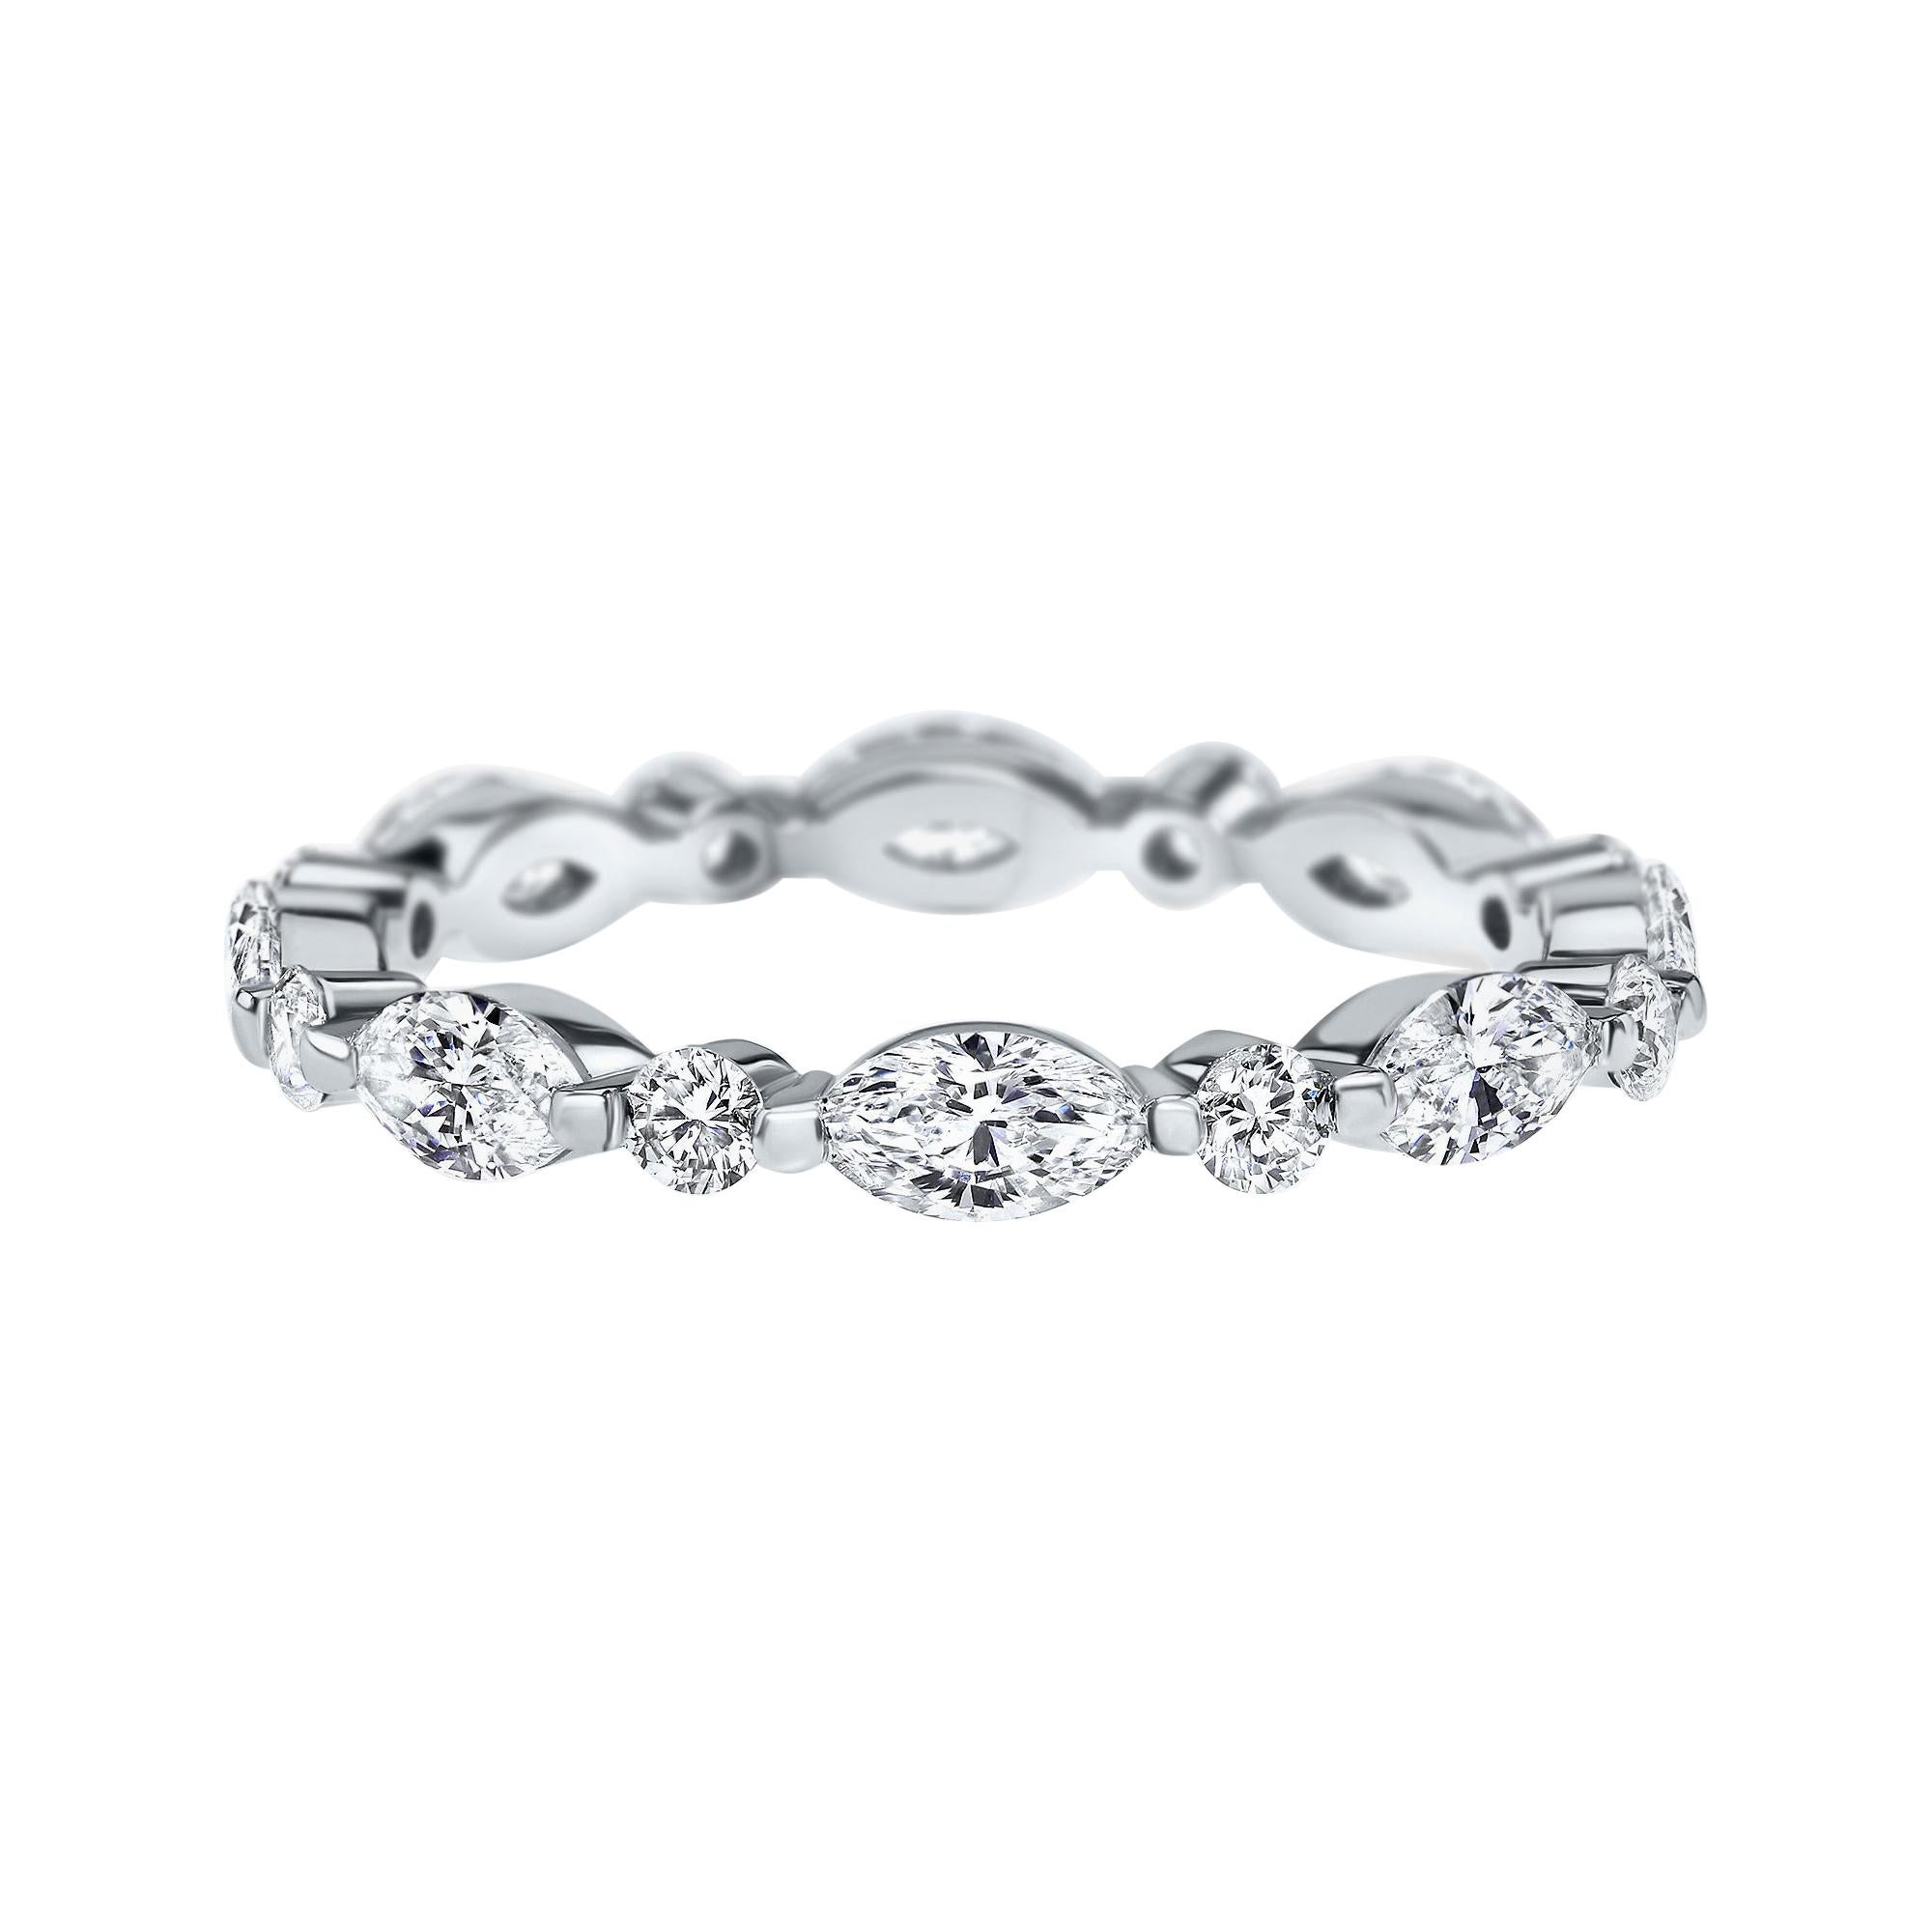 For Sale:  1.00 Carat Marquise & Round Cut Diamond Eternity Wedding Band in 14k White Gold